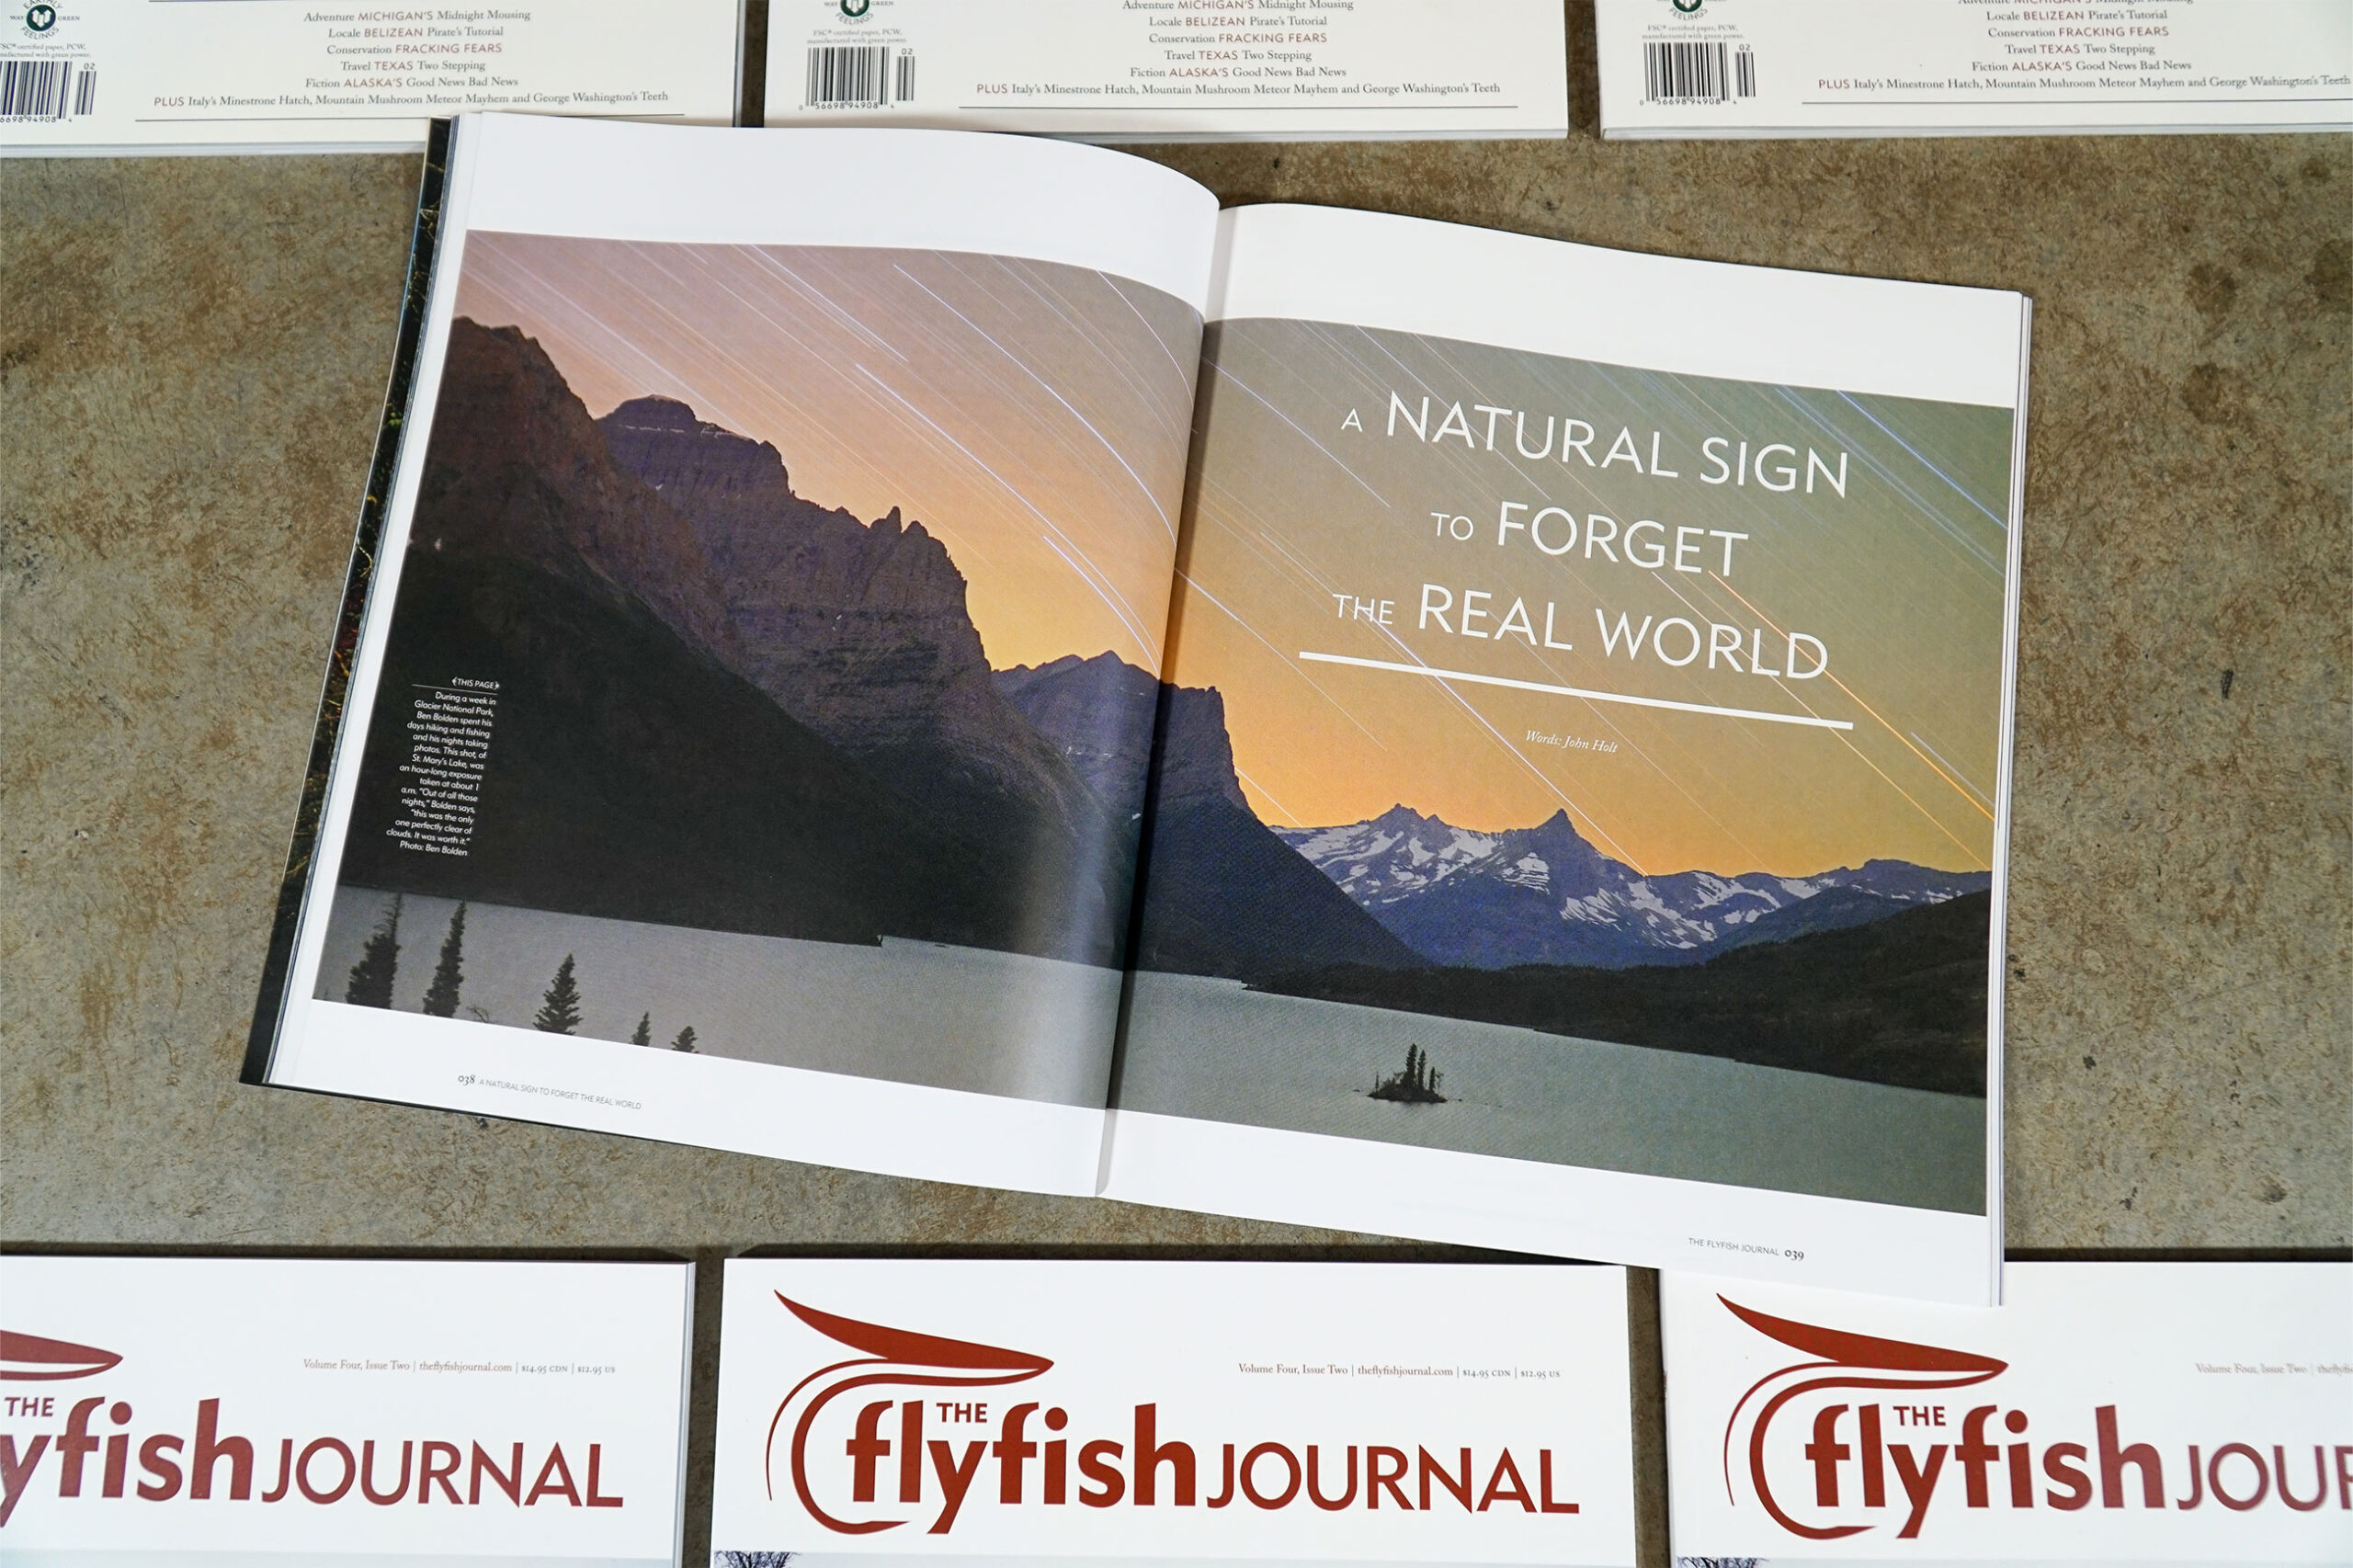 The Flyfish Journal Volume 4 Issue 2 Feature The Natural Sign to Forget the Real World